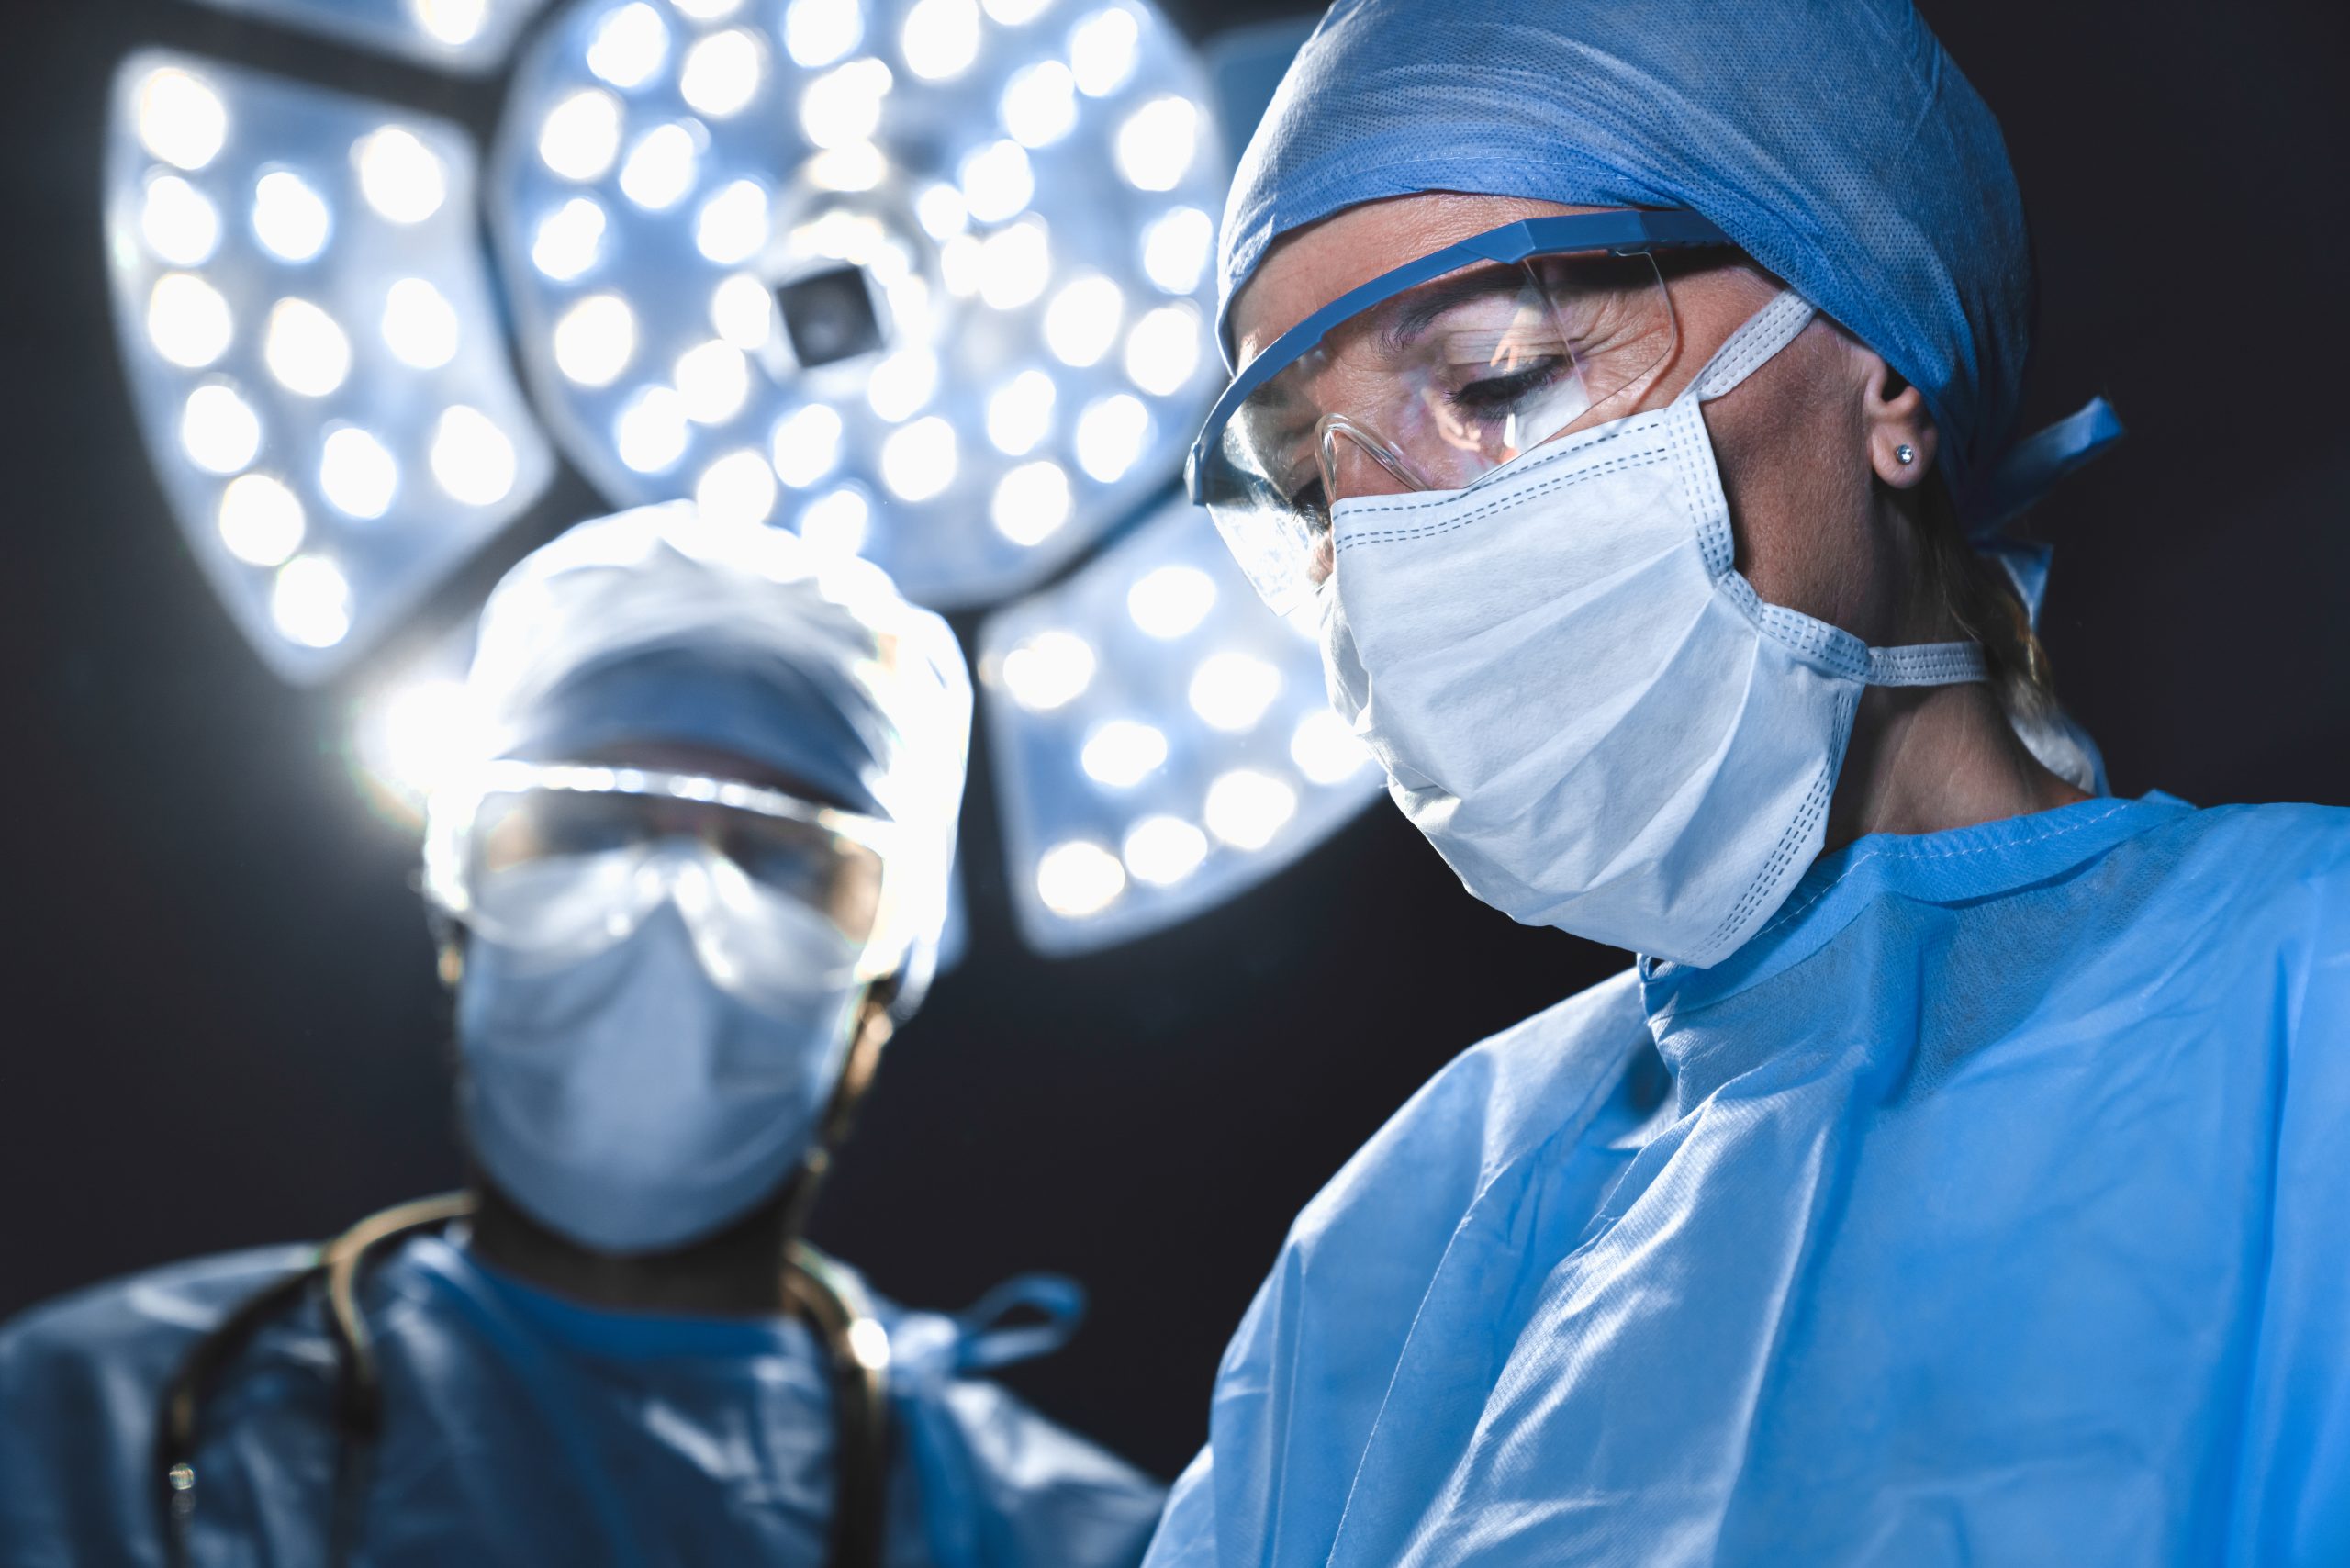 Medical professionals during surgery operating room.